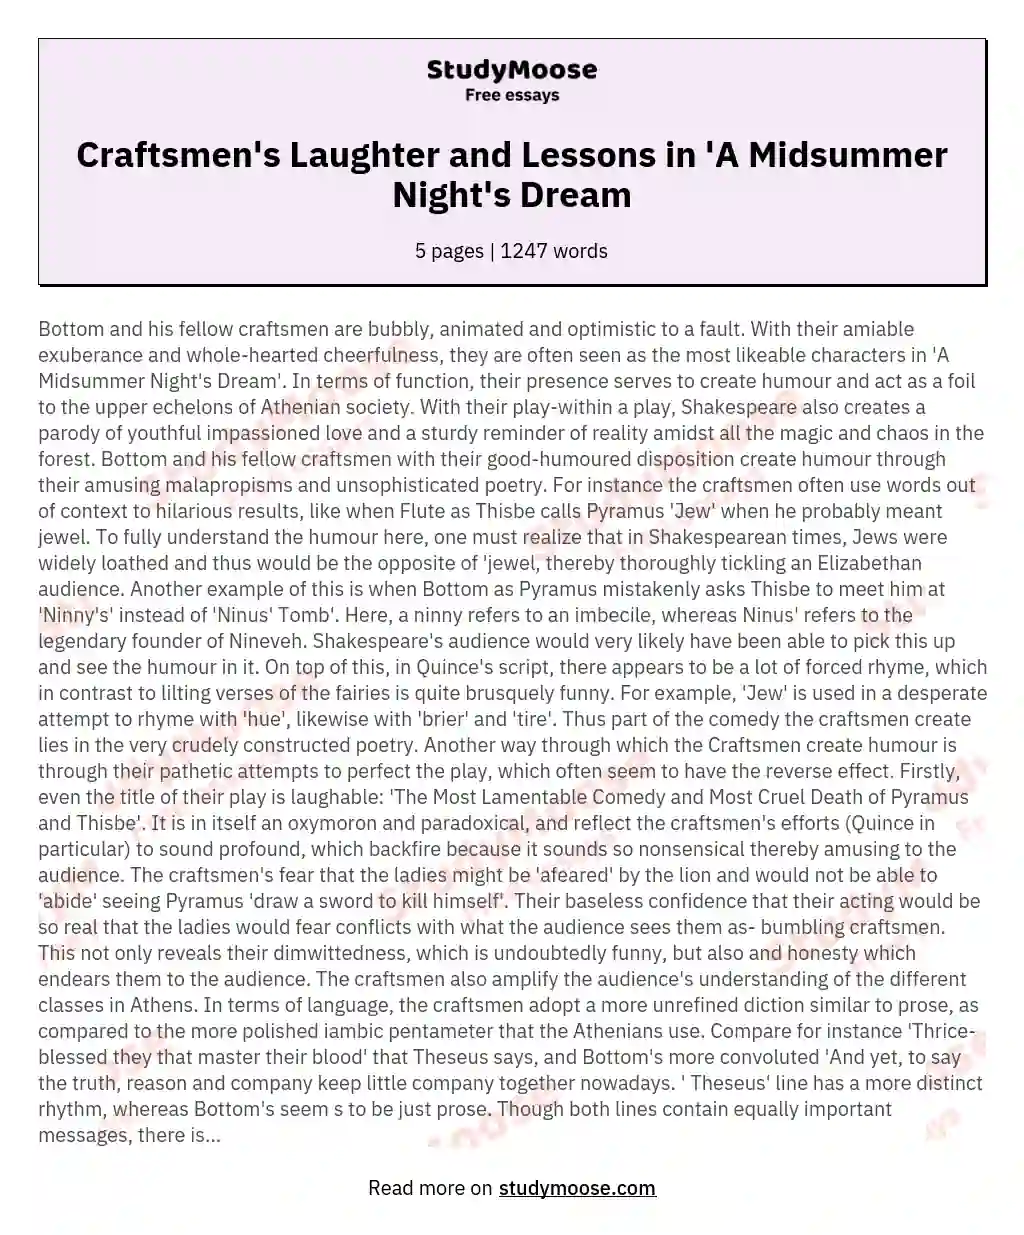 Craftsmen's Laughter and Lessons in 'A Midsummer Night's Dream essay